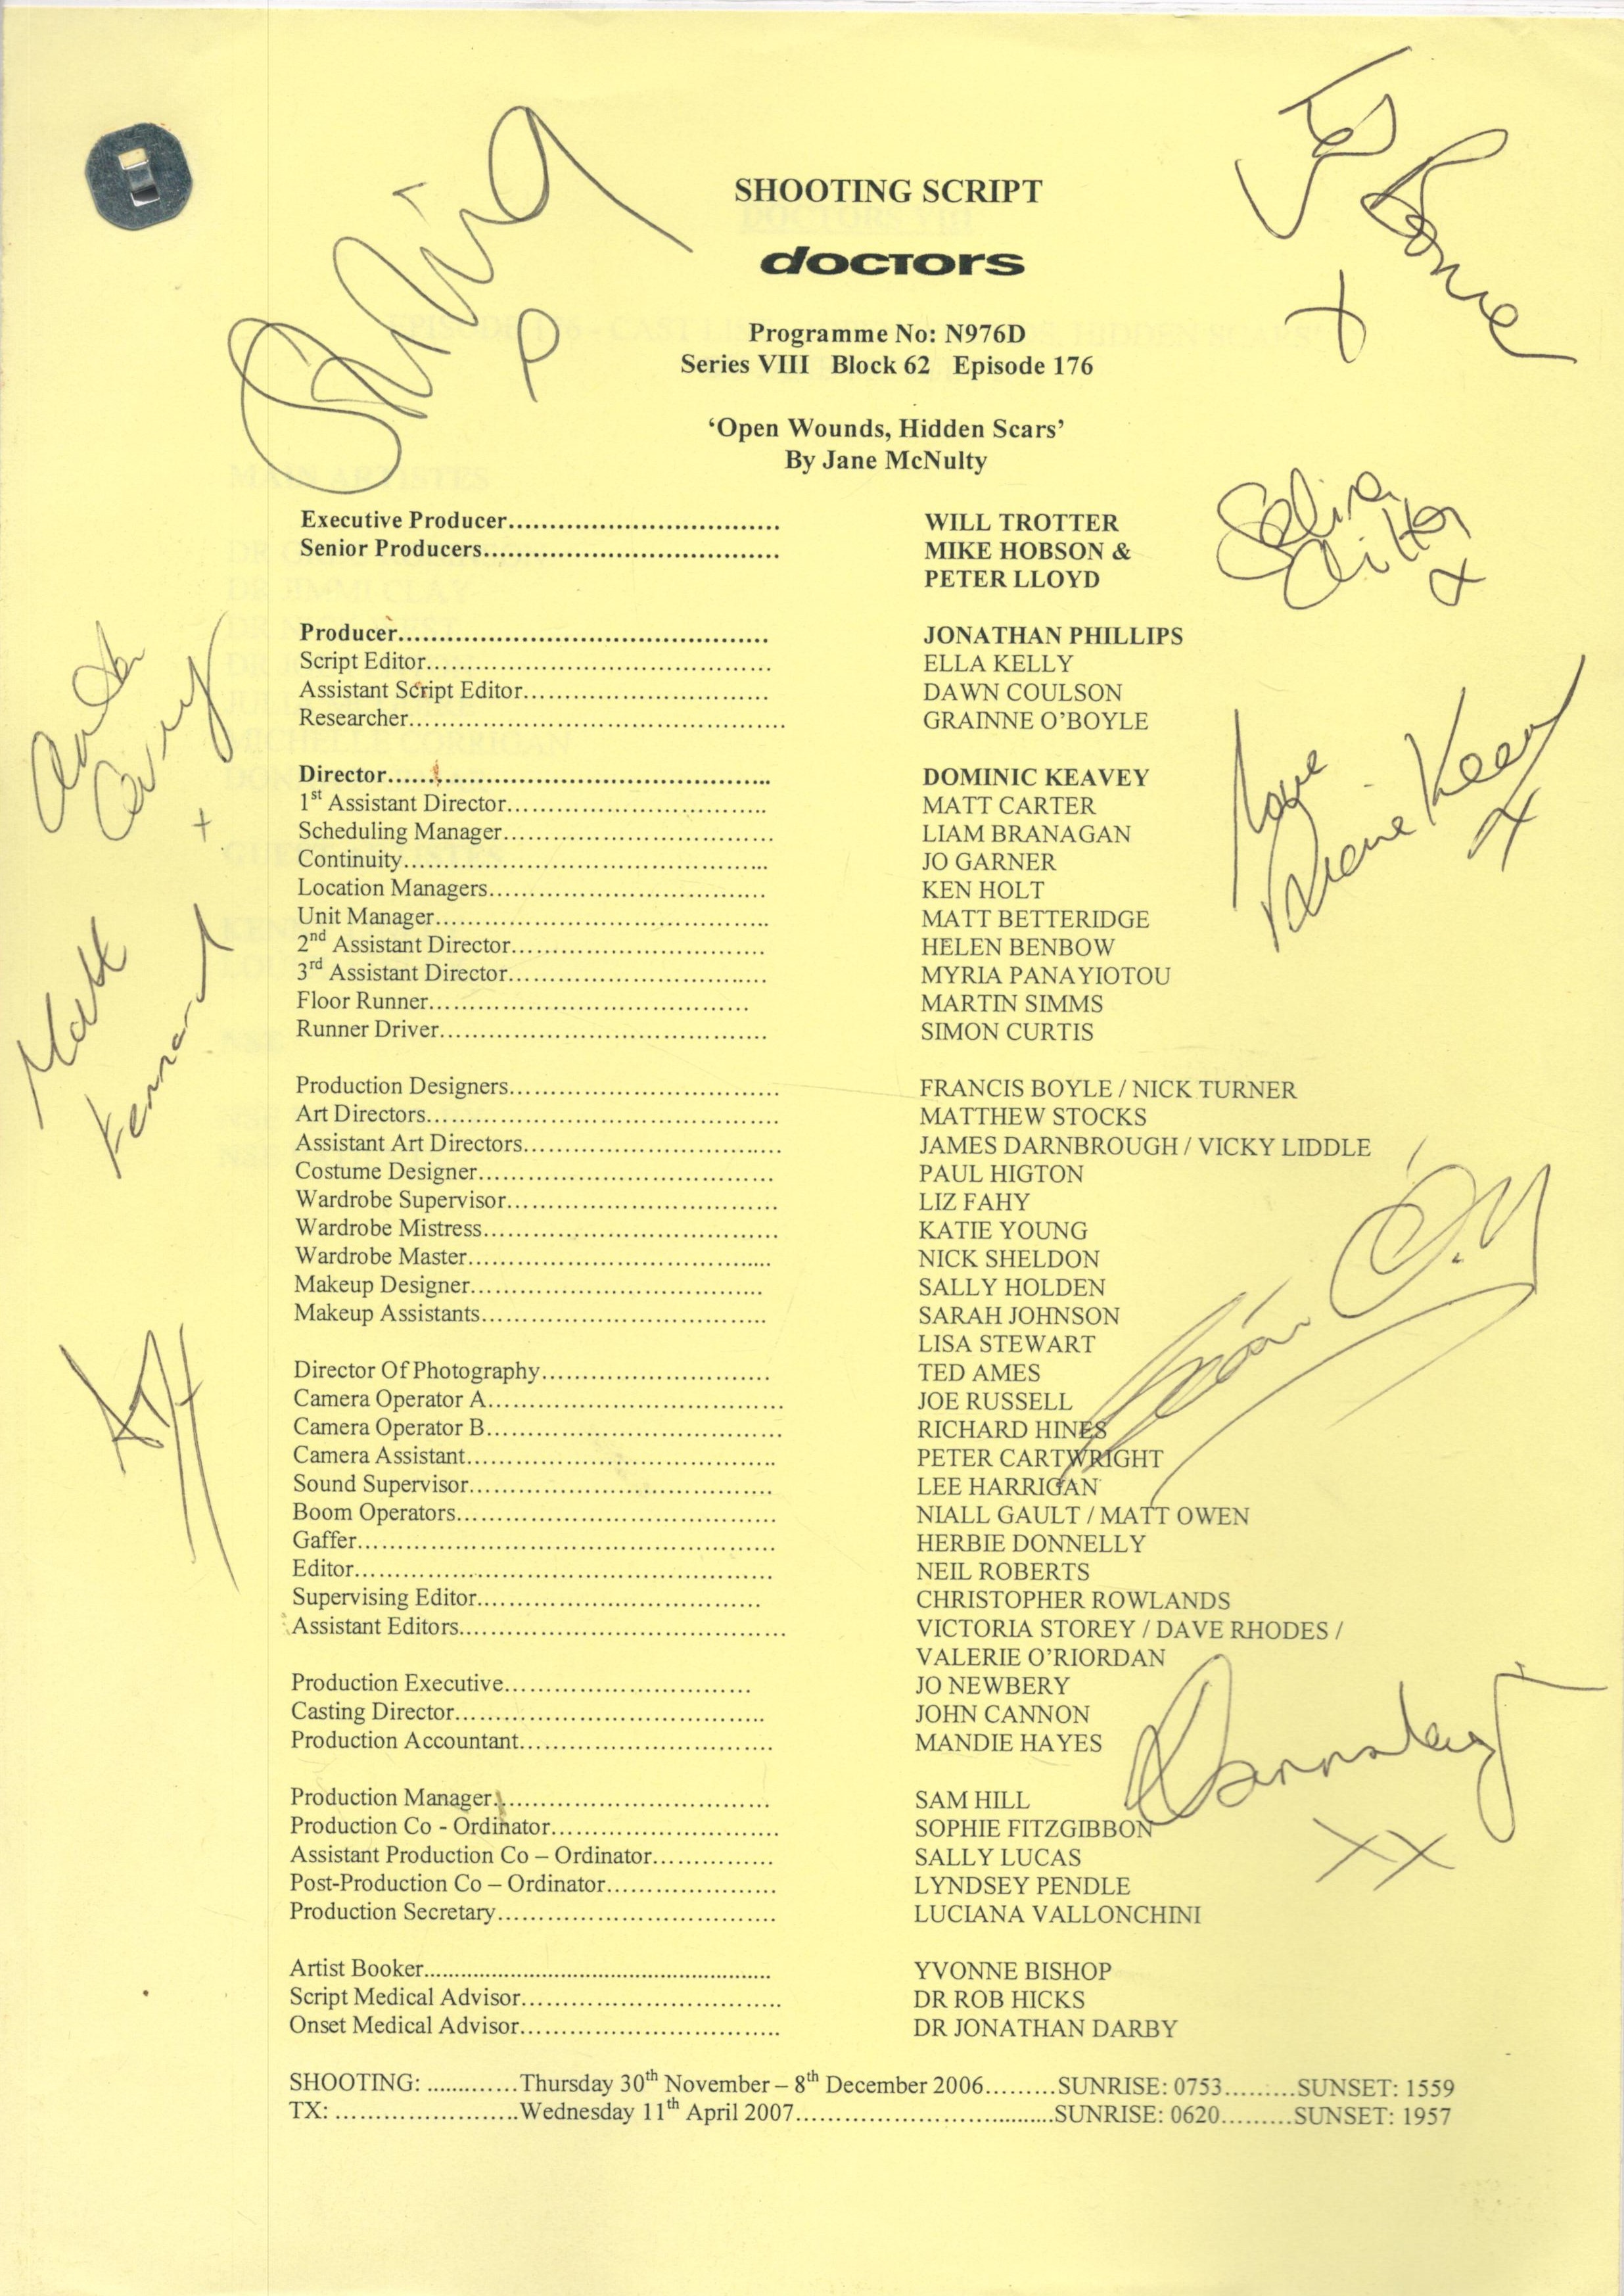 Shooting Script for Doctors signed by 9 cast members. Programme No: N976D Series VIII Episode 176.